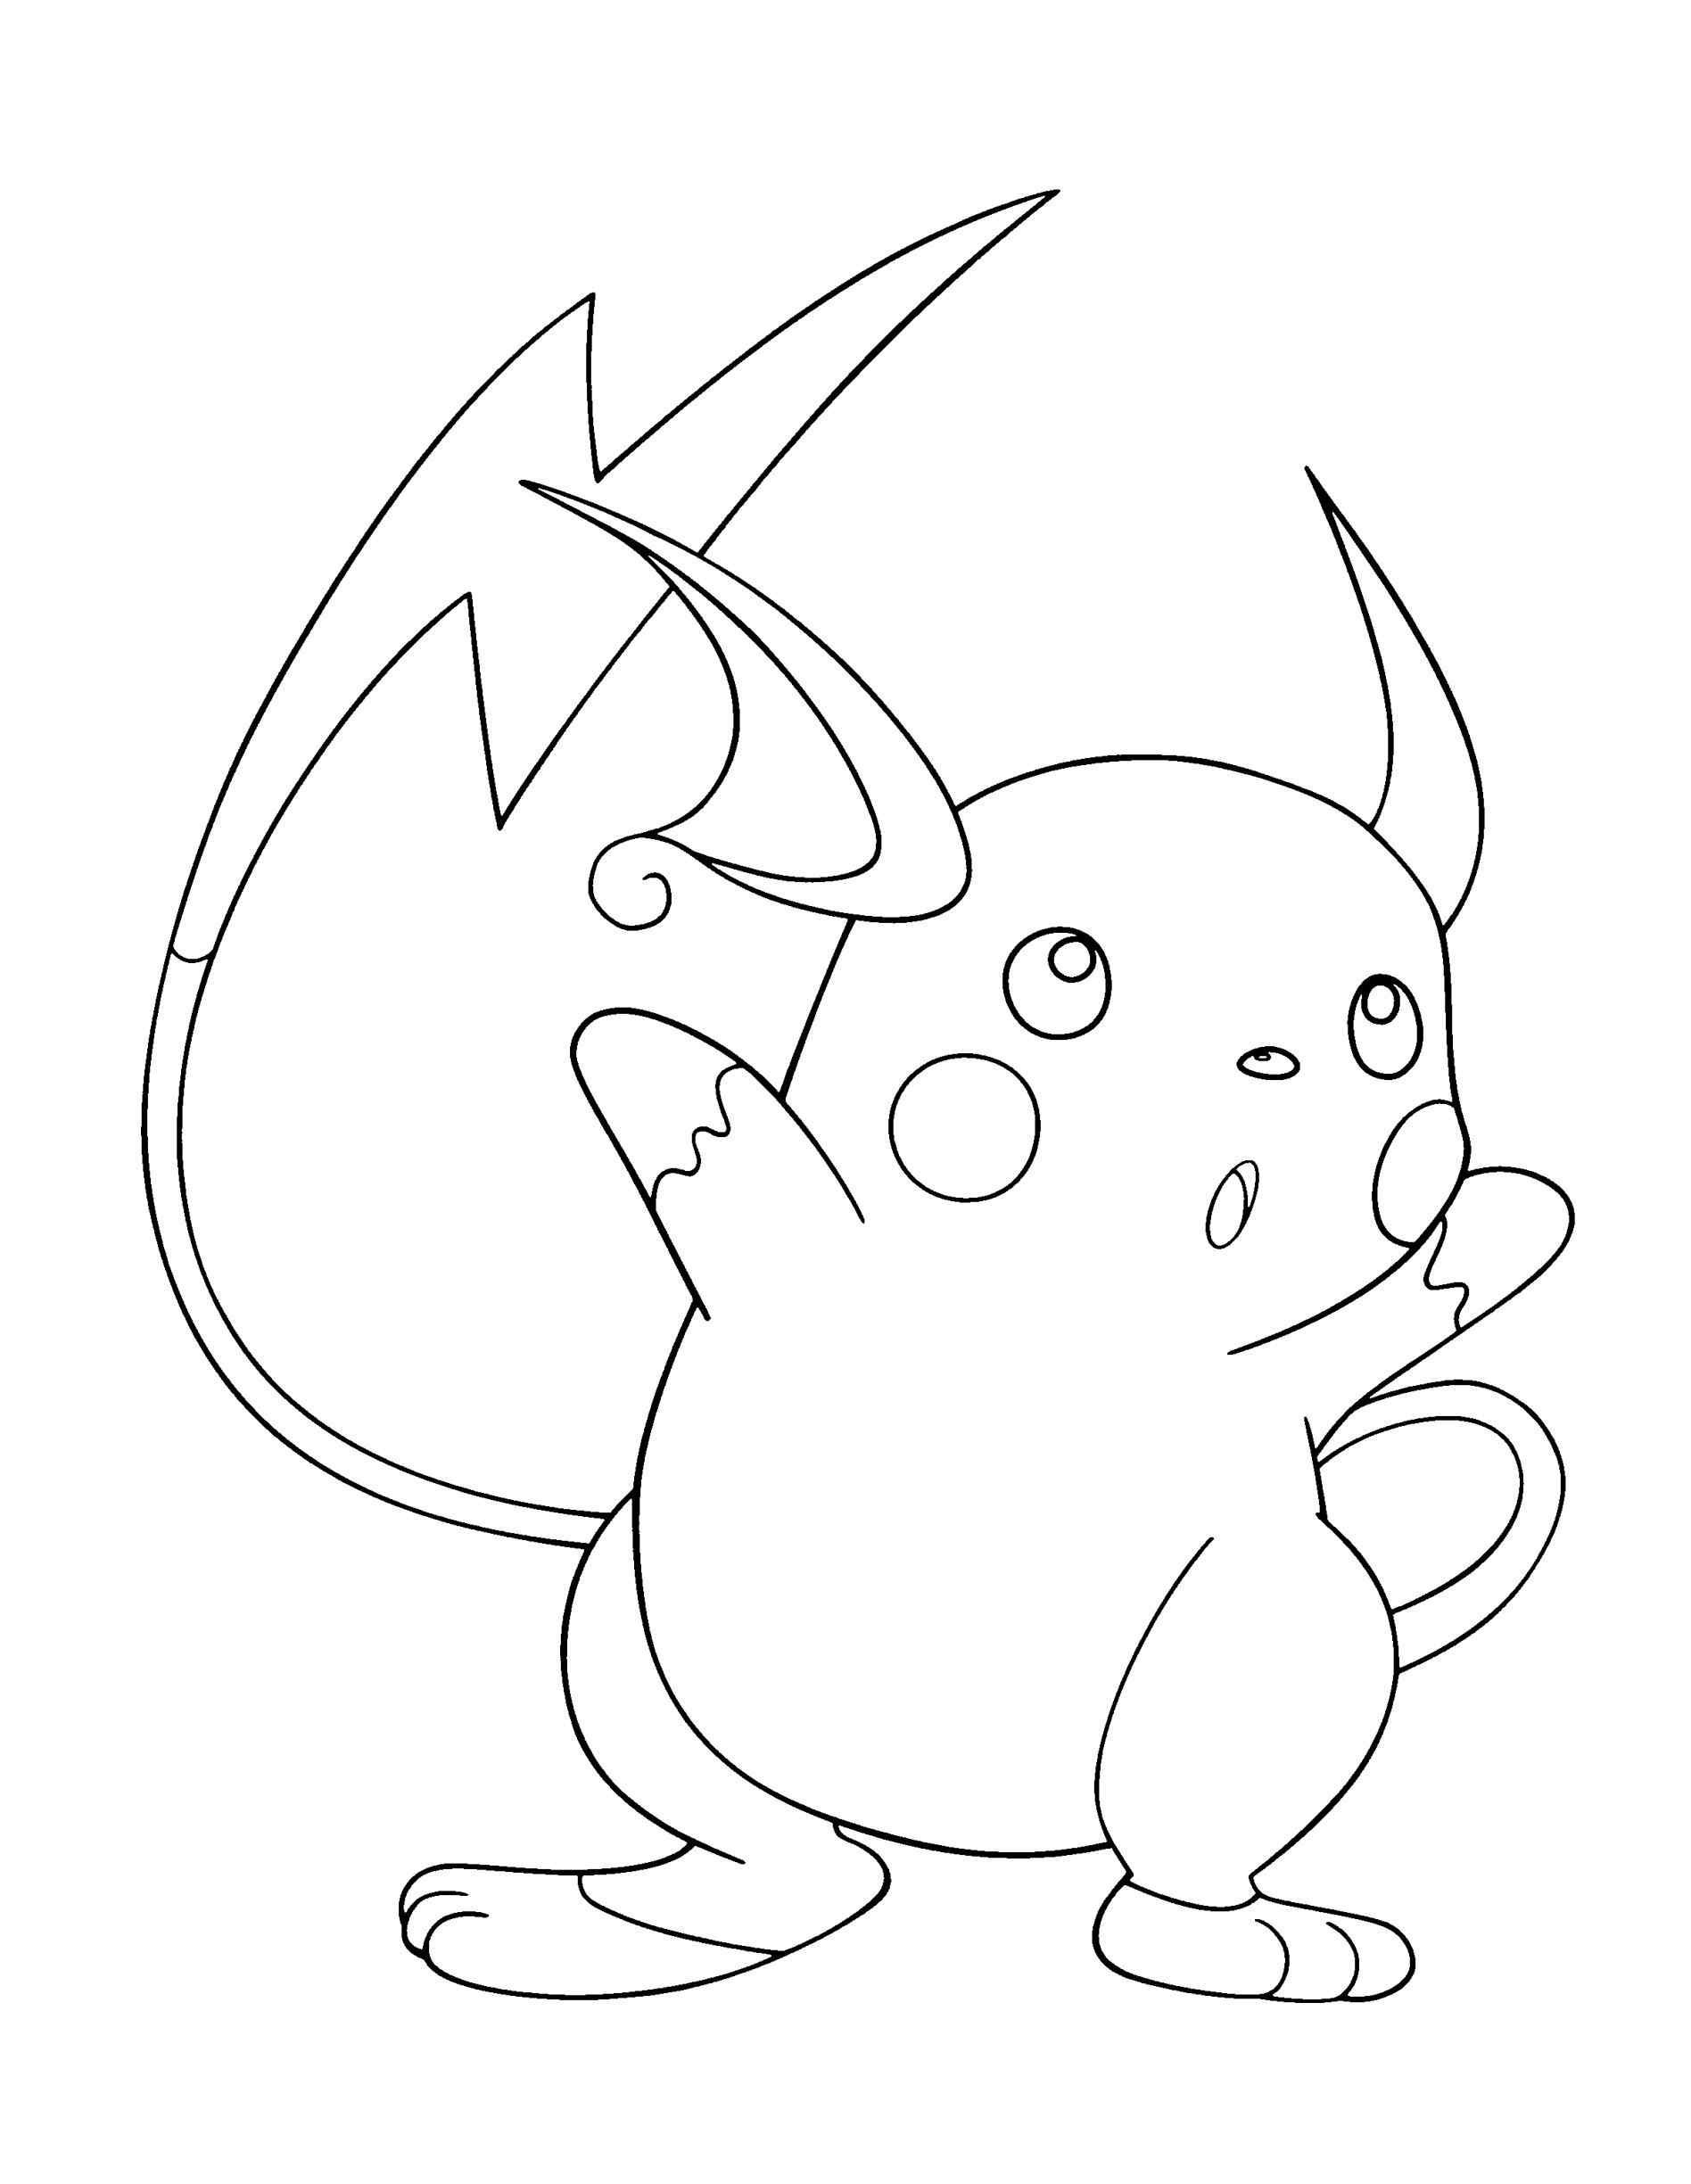 Giratina Coloring Pages Raichu Coloring Page Best Pages Printable 11 Of In Coloring Pages